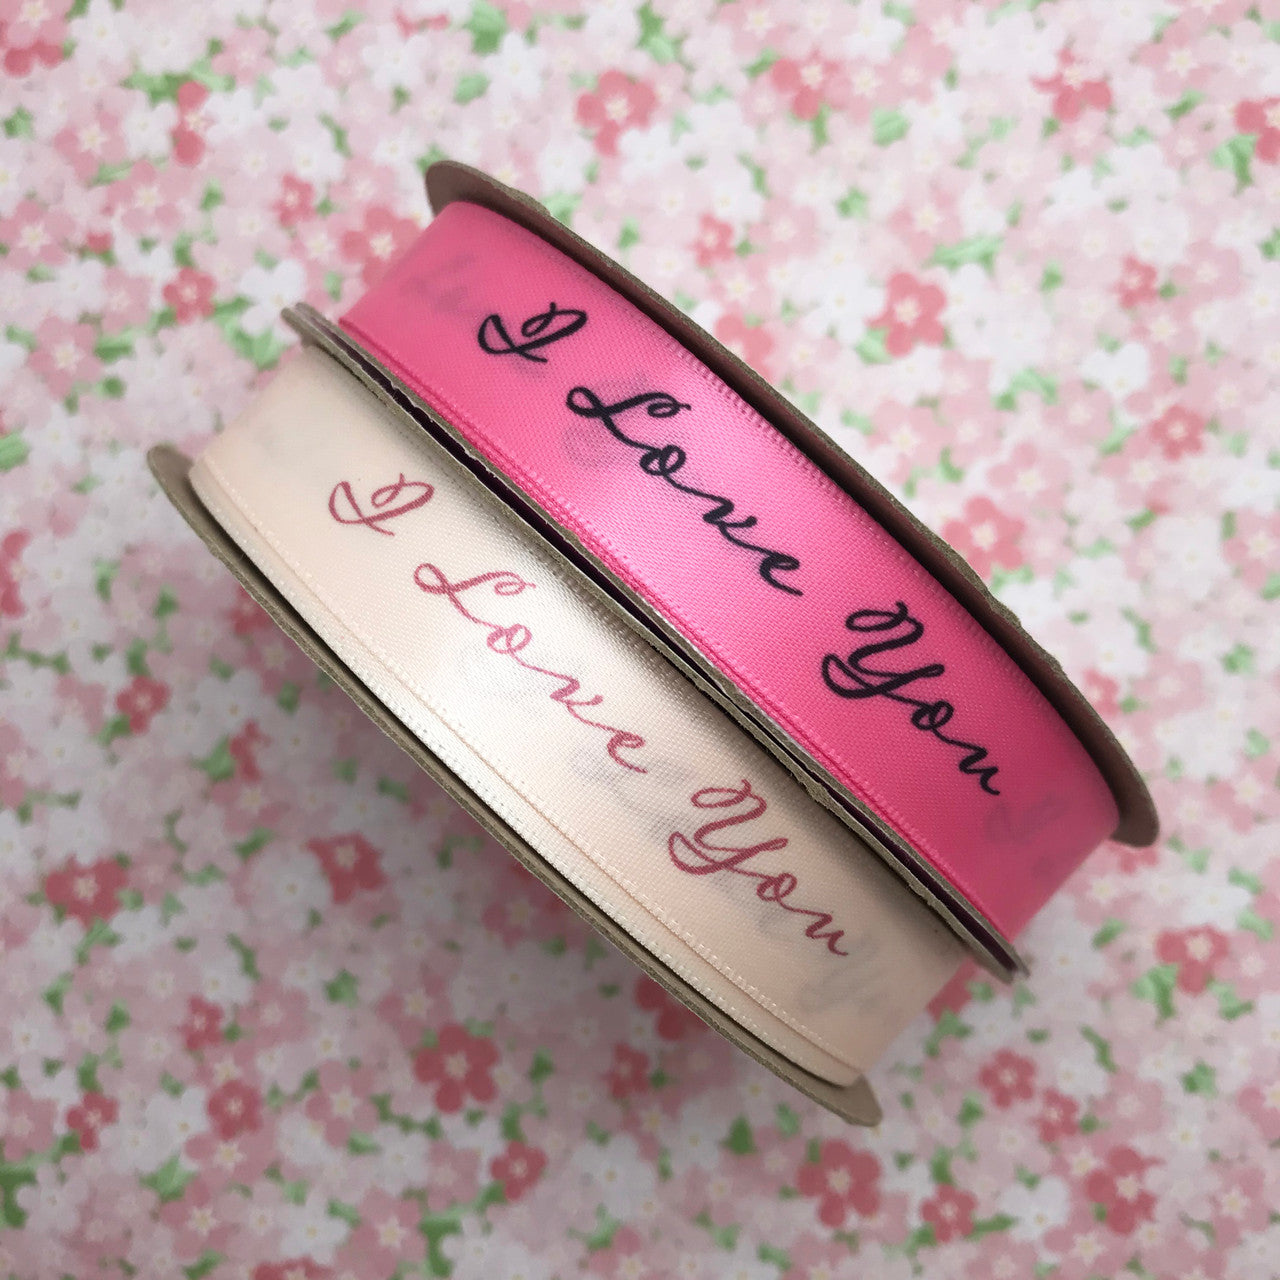 We offer our beautiful I Love You ribbon is available in two colors! Make your Valentine, Engagement and Wedding gifts extra special with one of these lovely luxury ribbons!